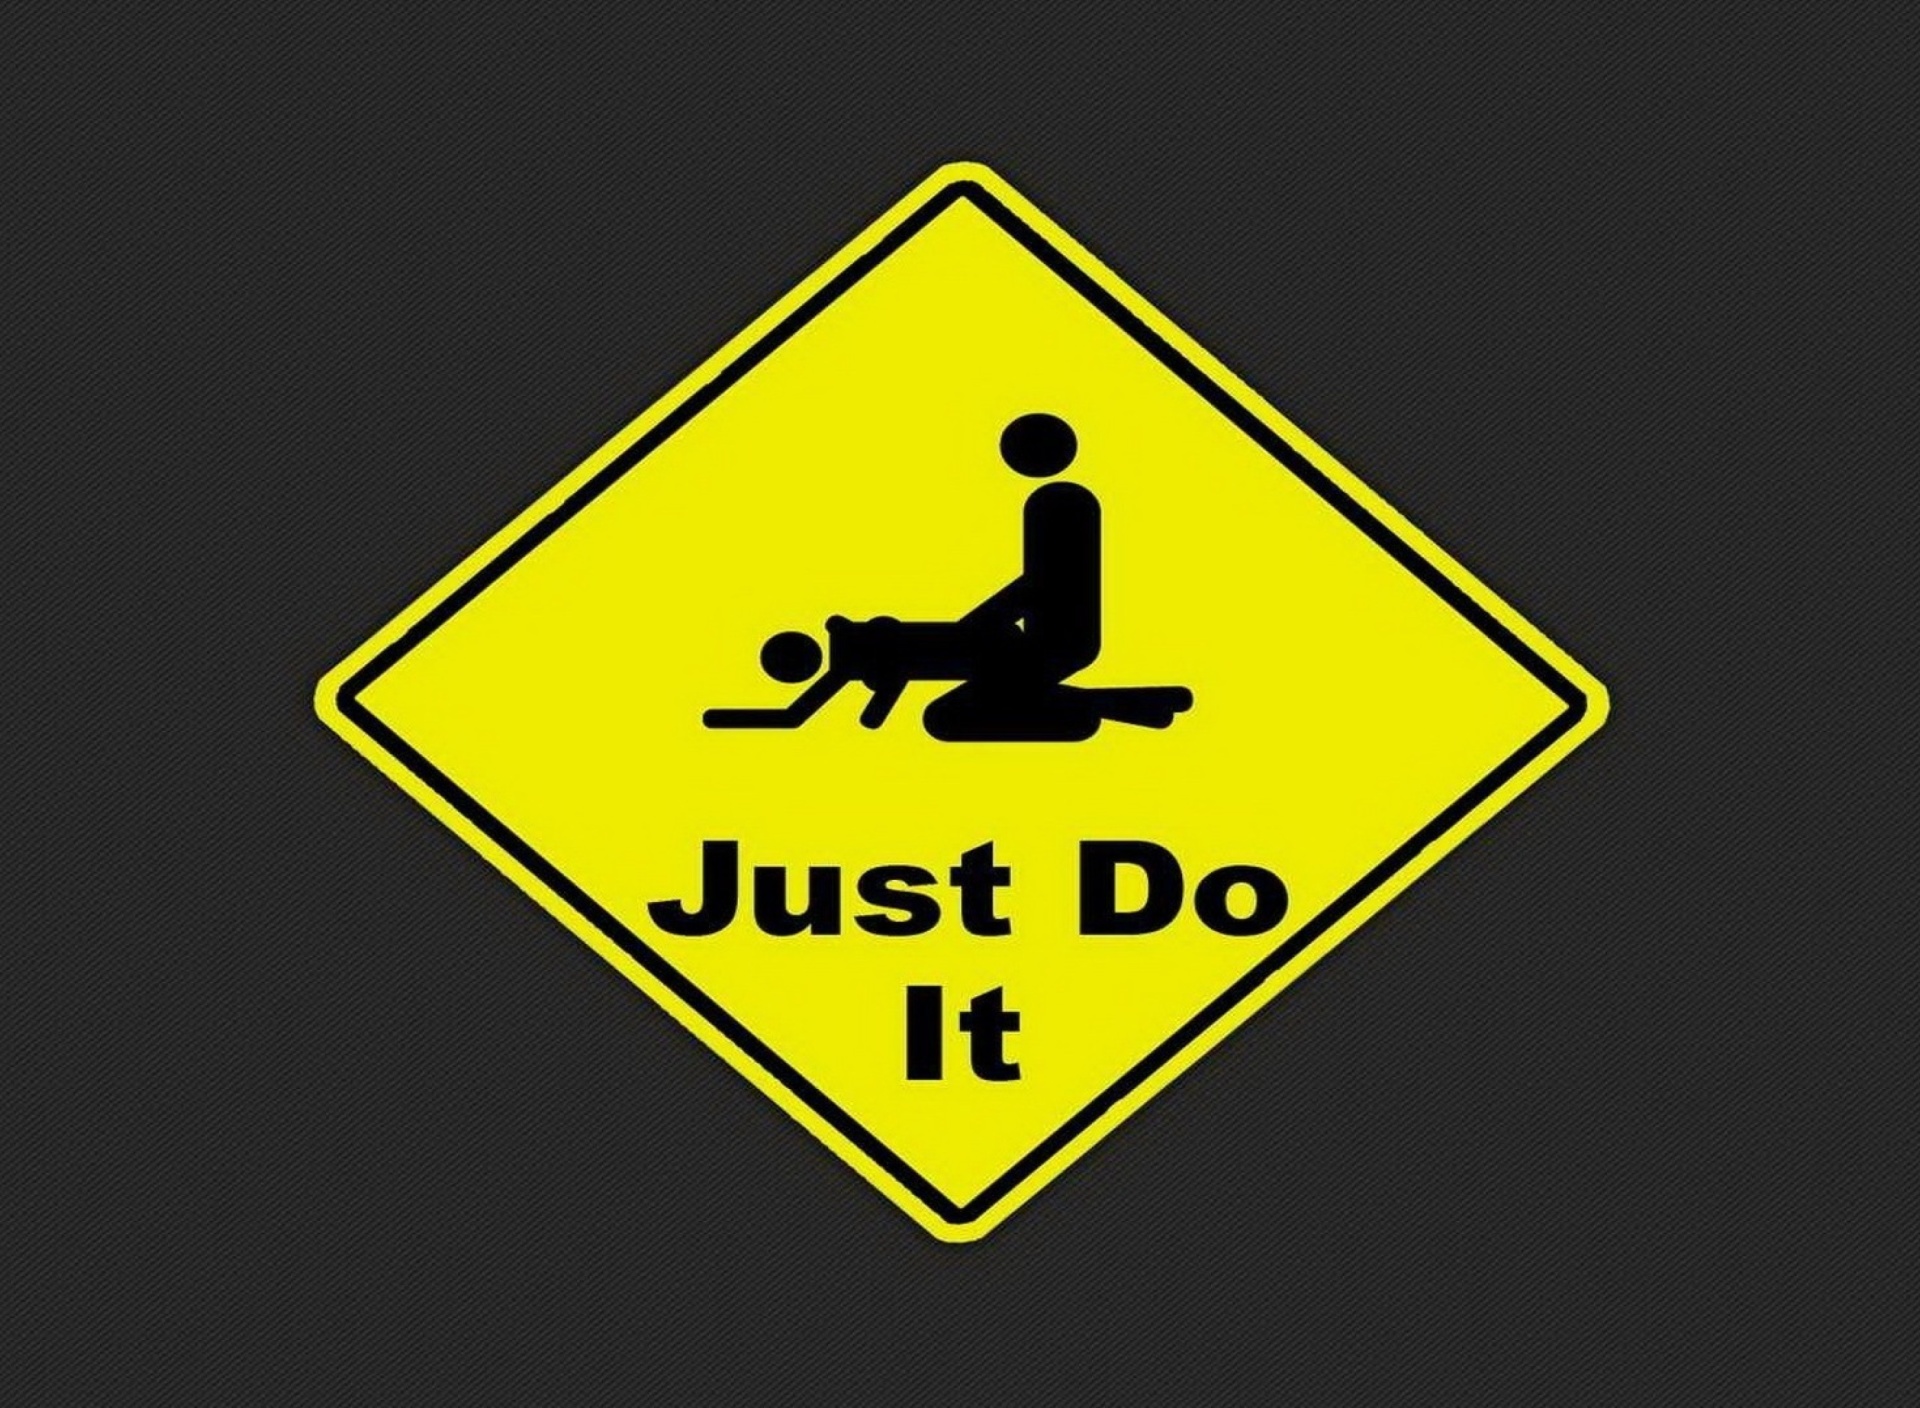 Das Just Do It Funny Sign Wallpaper 1920x1408